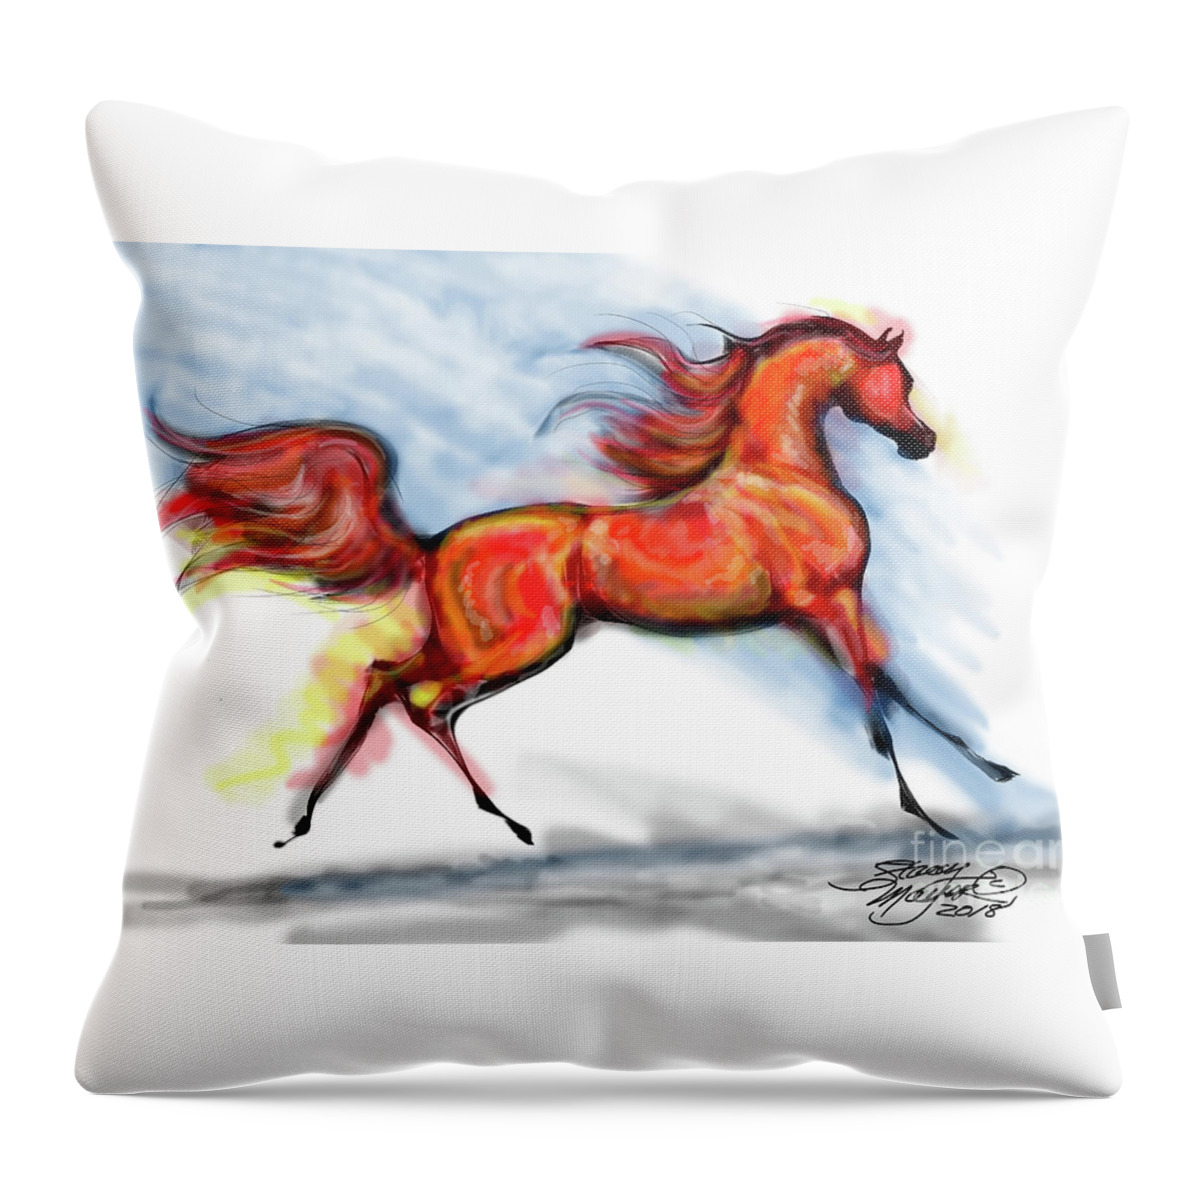 Arabian Horse Drawing Throw Pillow featuring the digital art Staceys Arabian Horse by Stacey Mayer